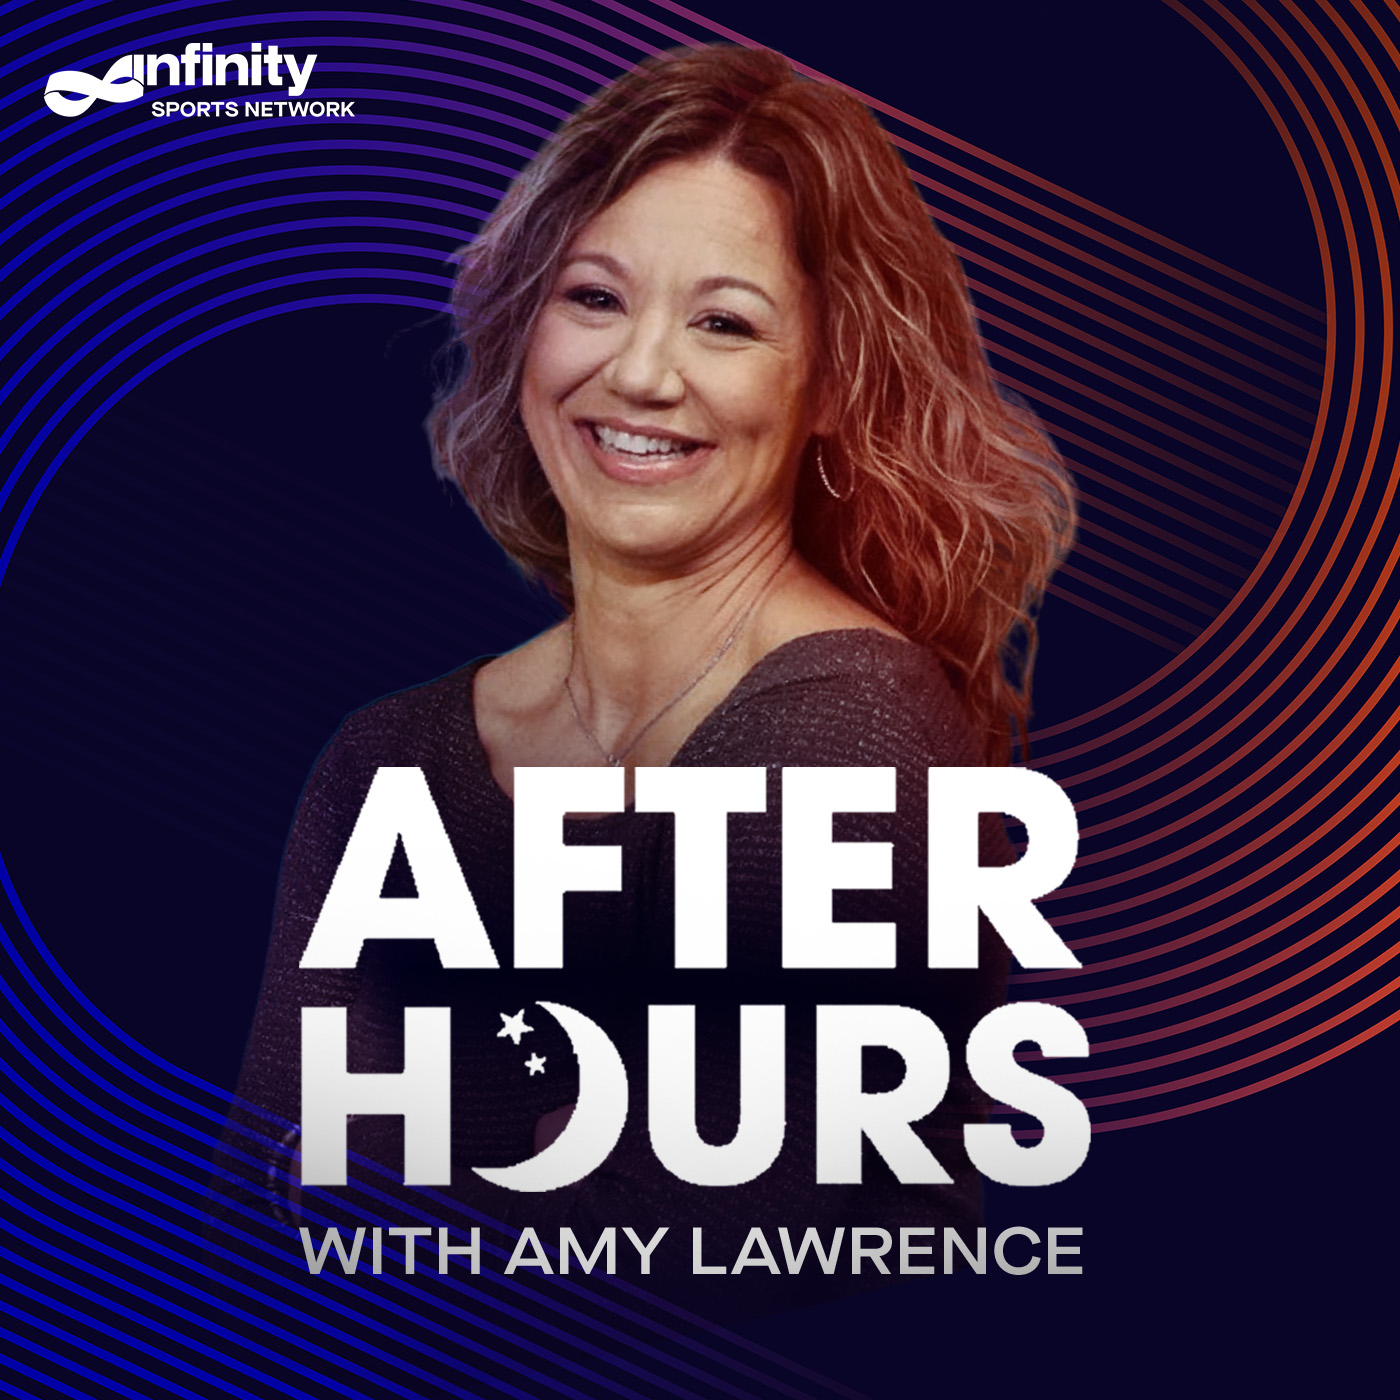 4/29/21 After Hours with Amy Lawrence PODCAST: Hour 2